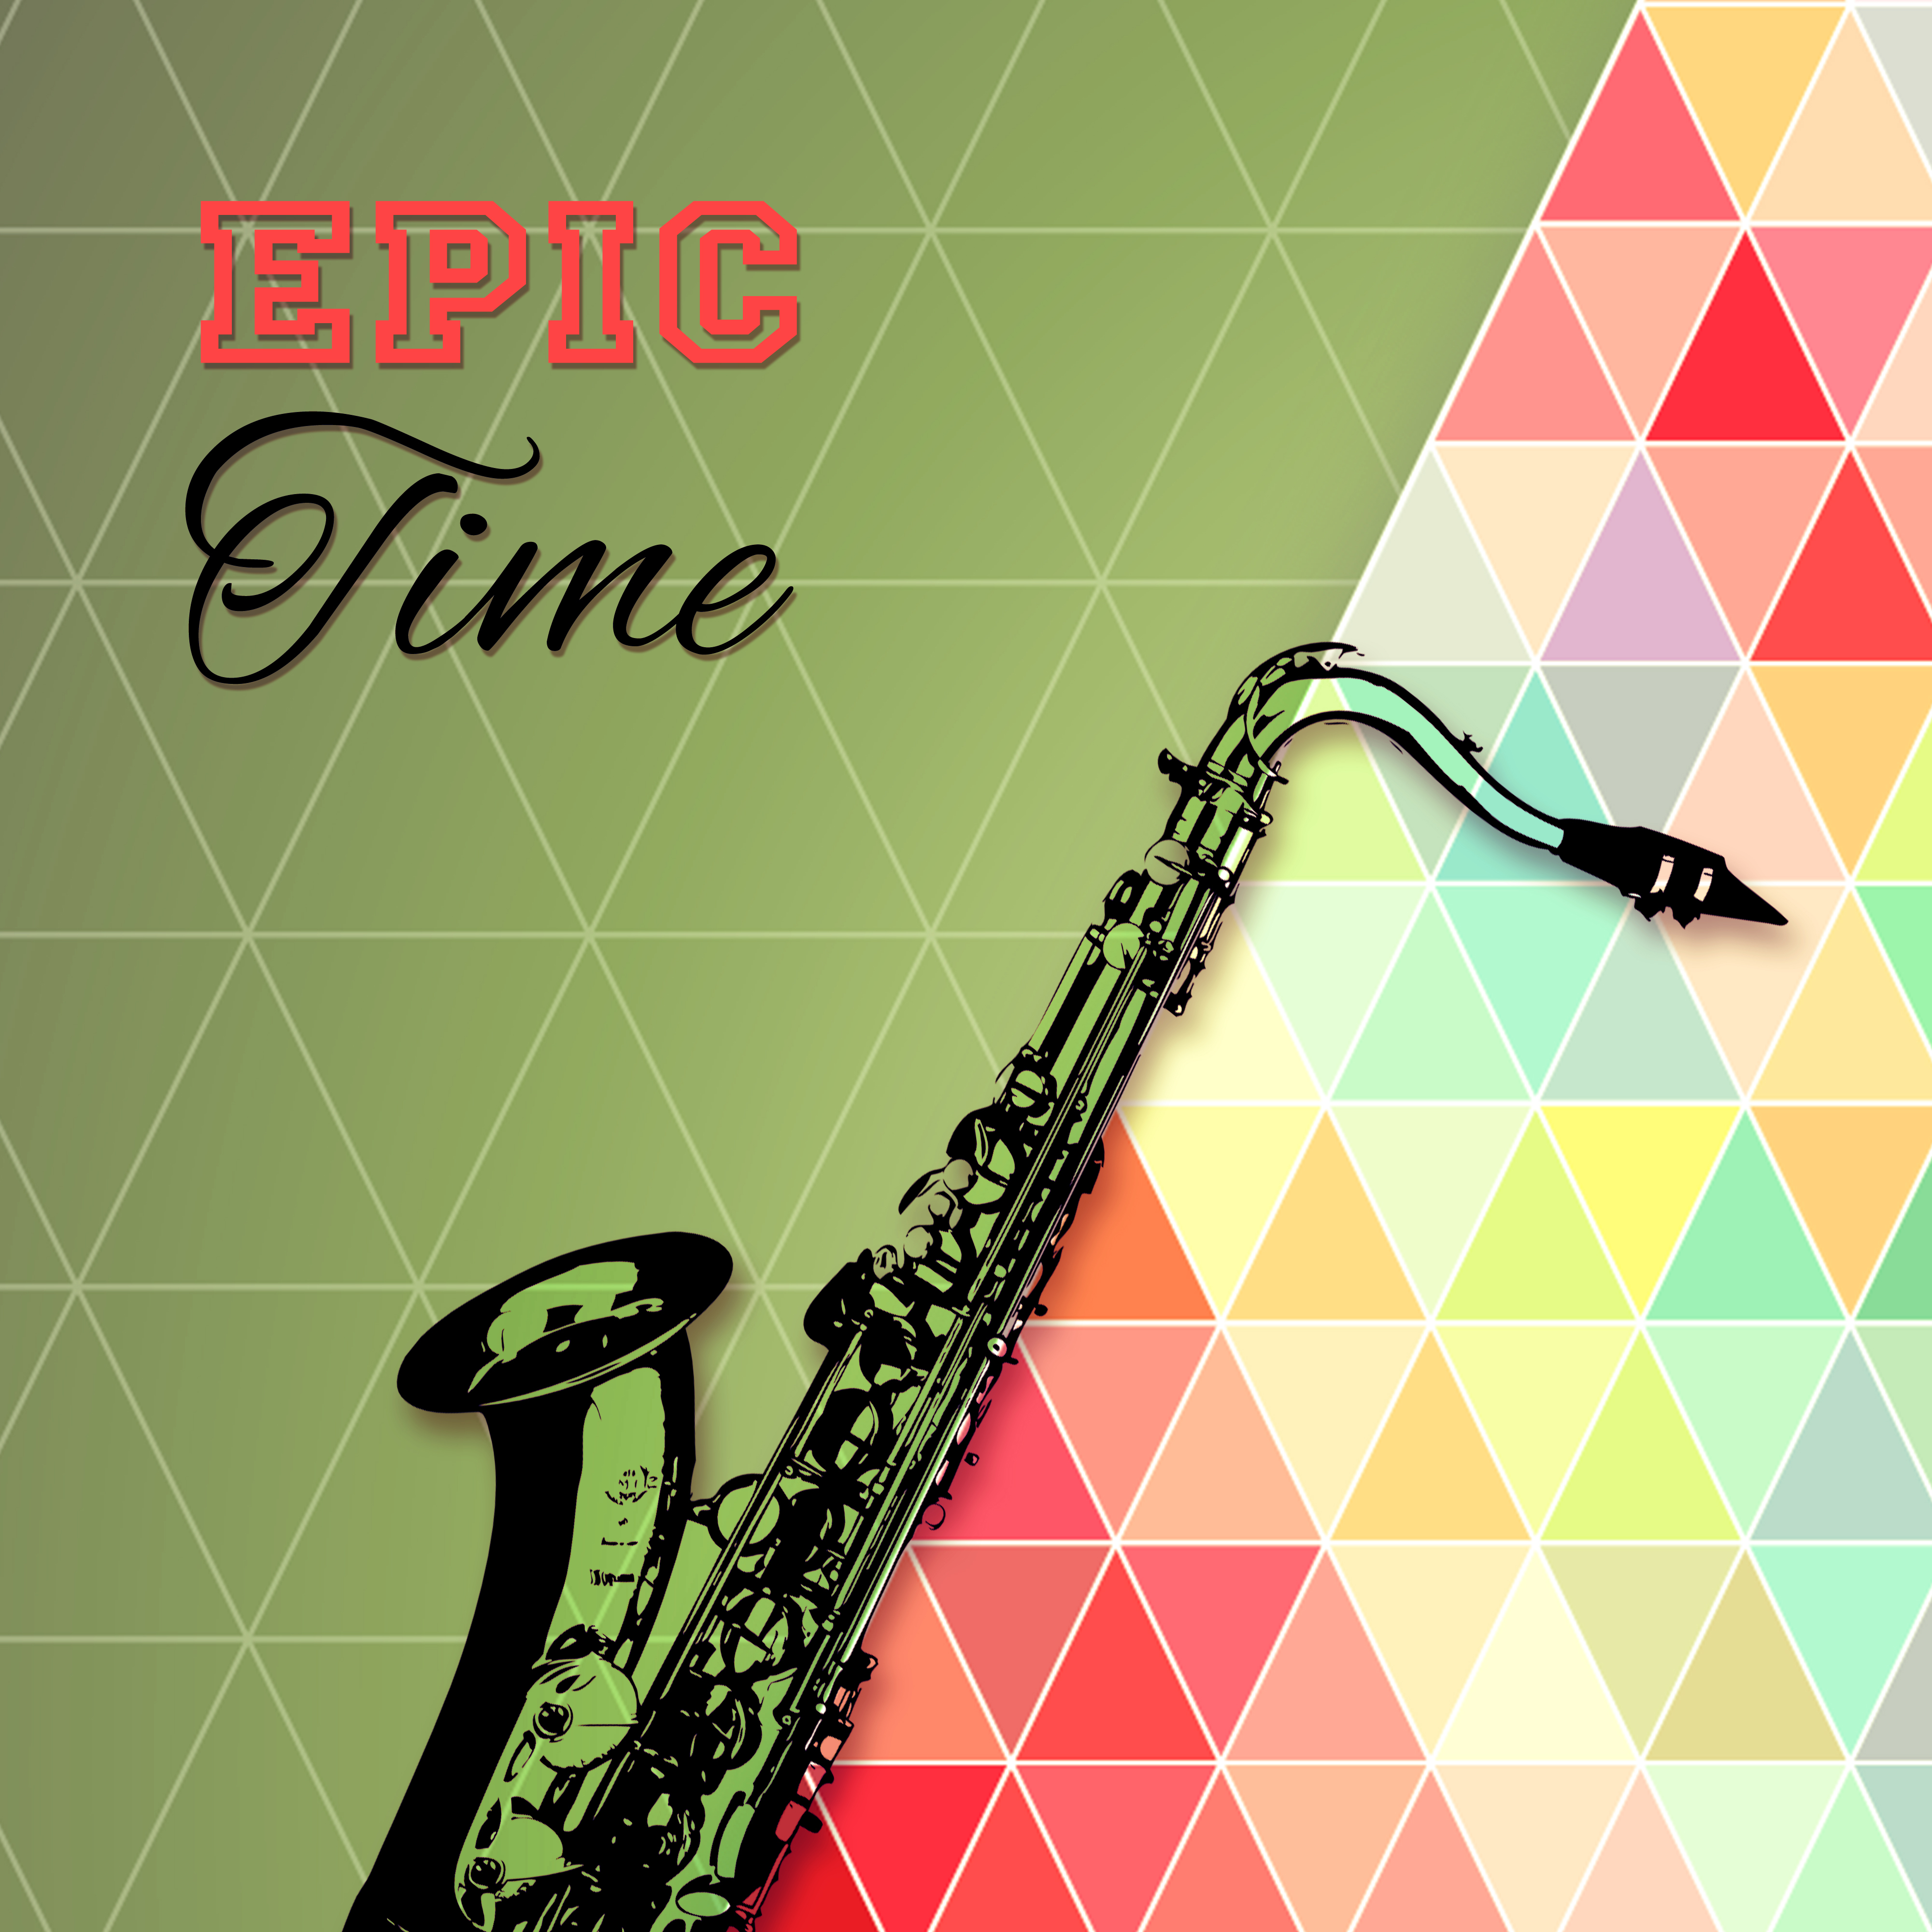 Epic Time - Jazz Music Relaxation, Acoustic Guitar & Piano, Smooth Jazz Sax, Bossanova, Cocktail Party